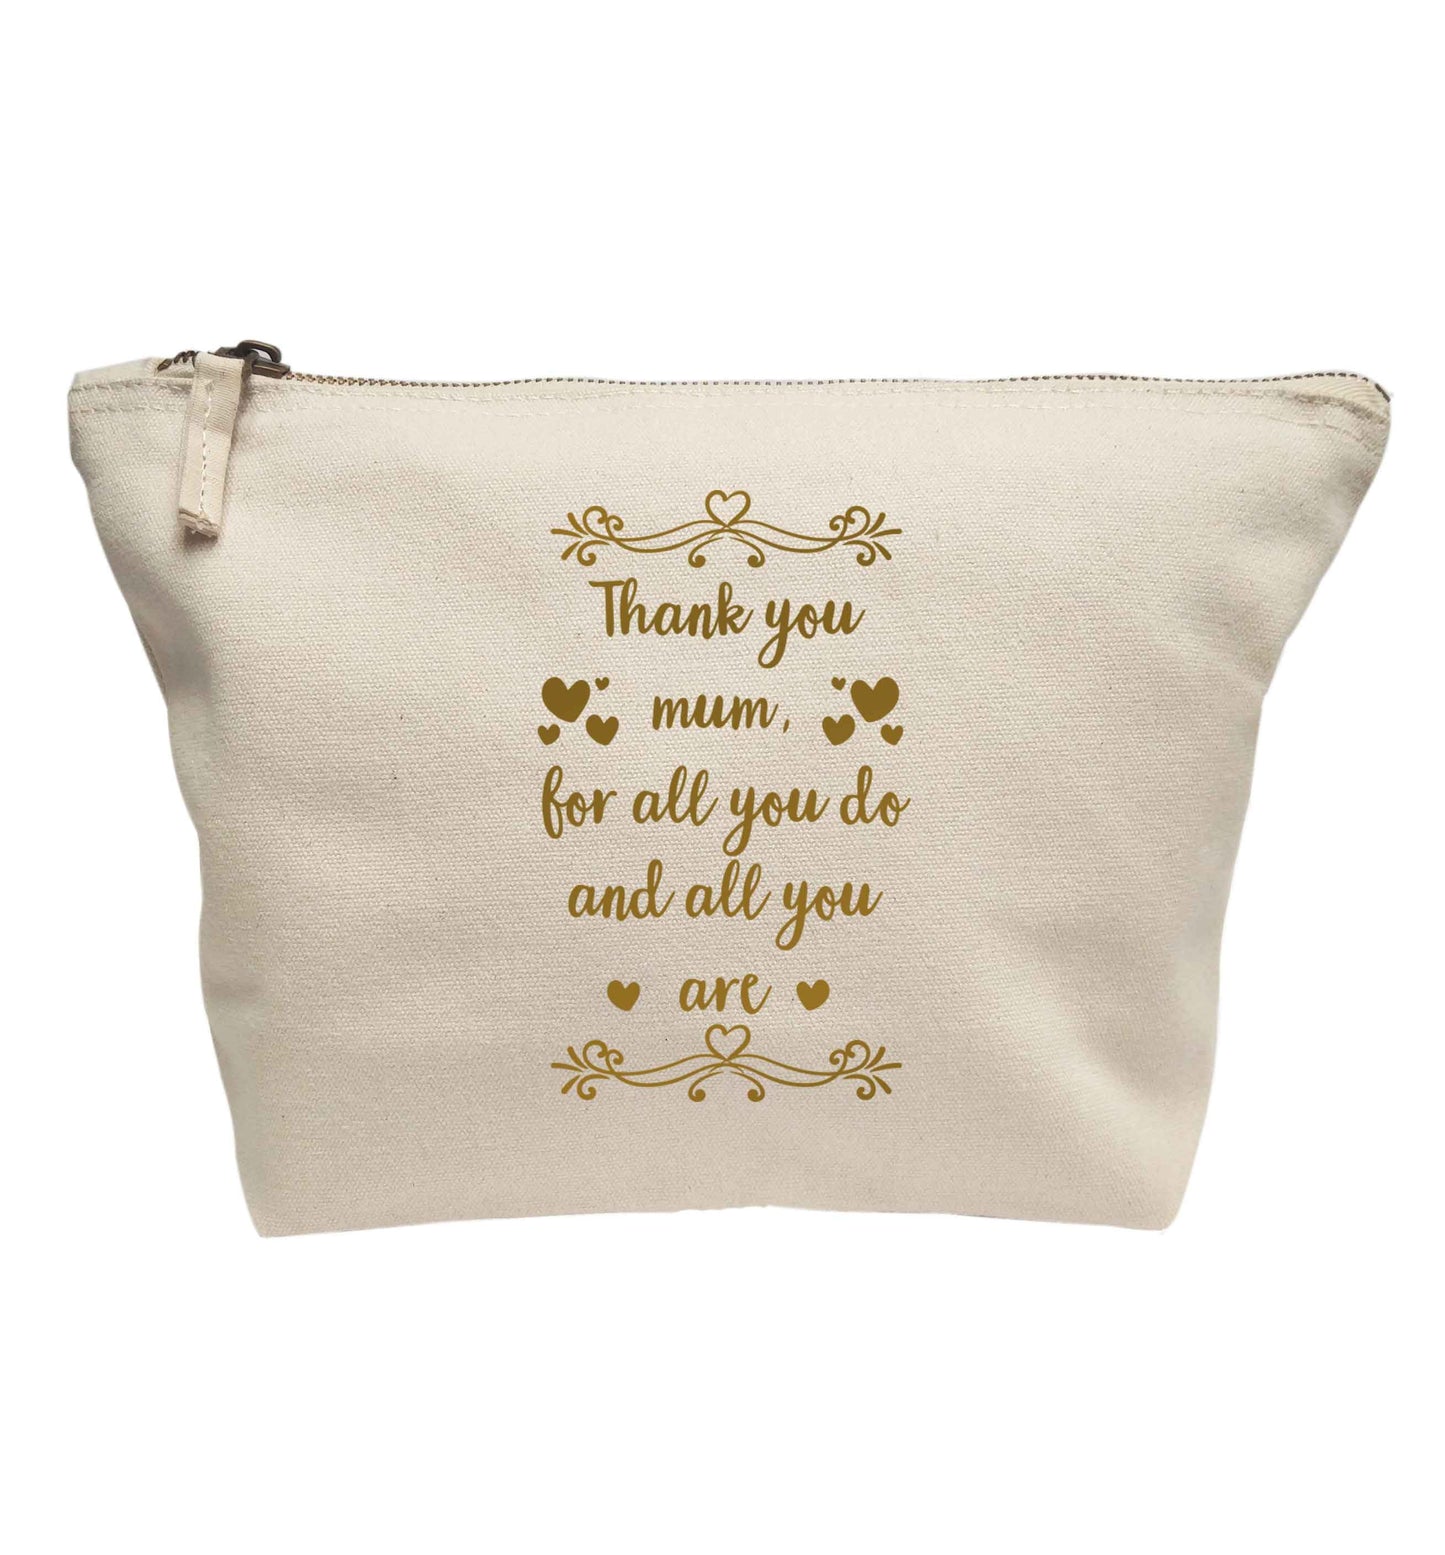 Thank you mum for all you do and all you are | Makeup / wash bag